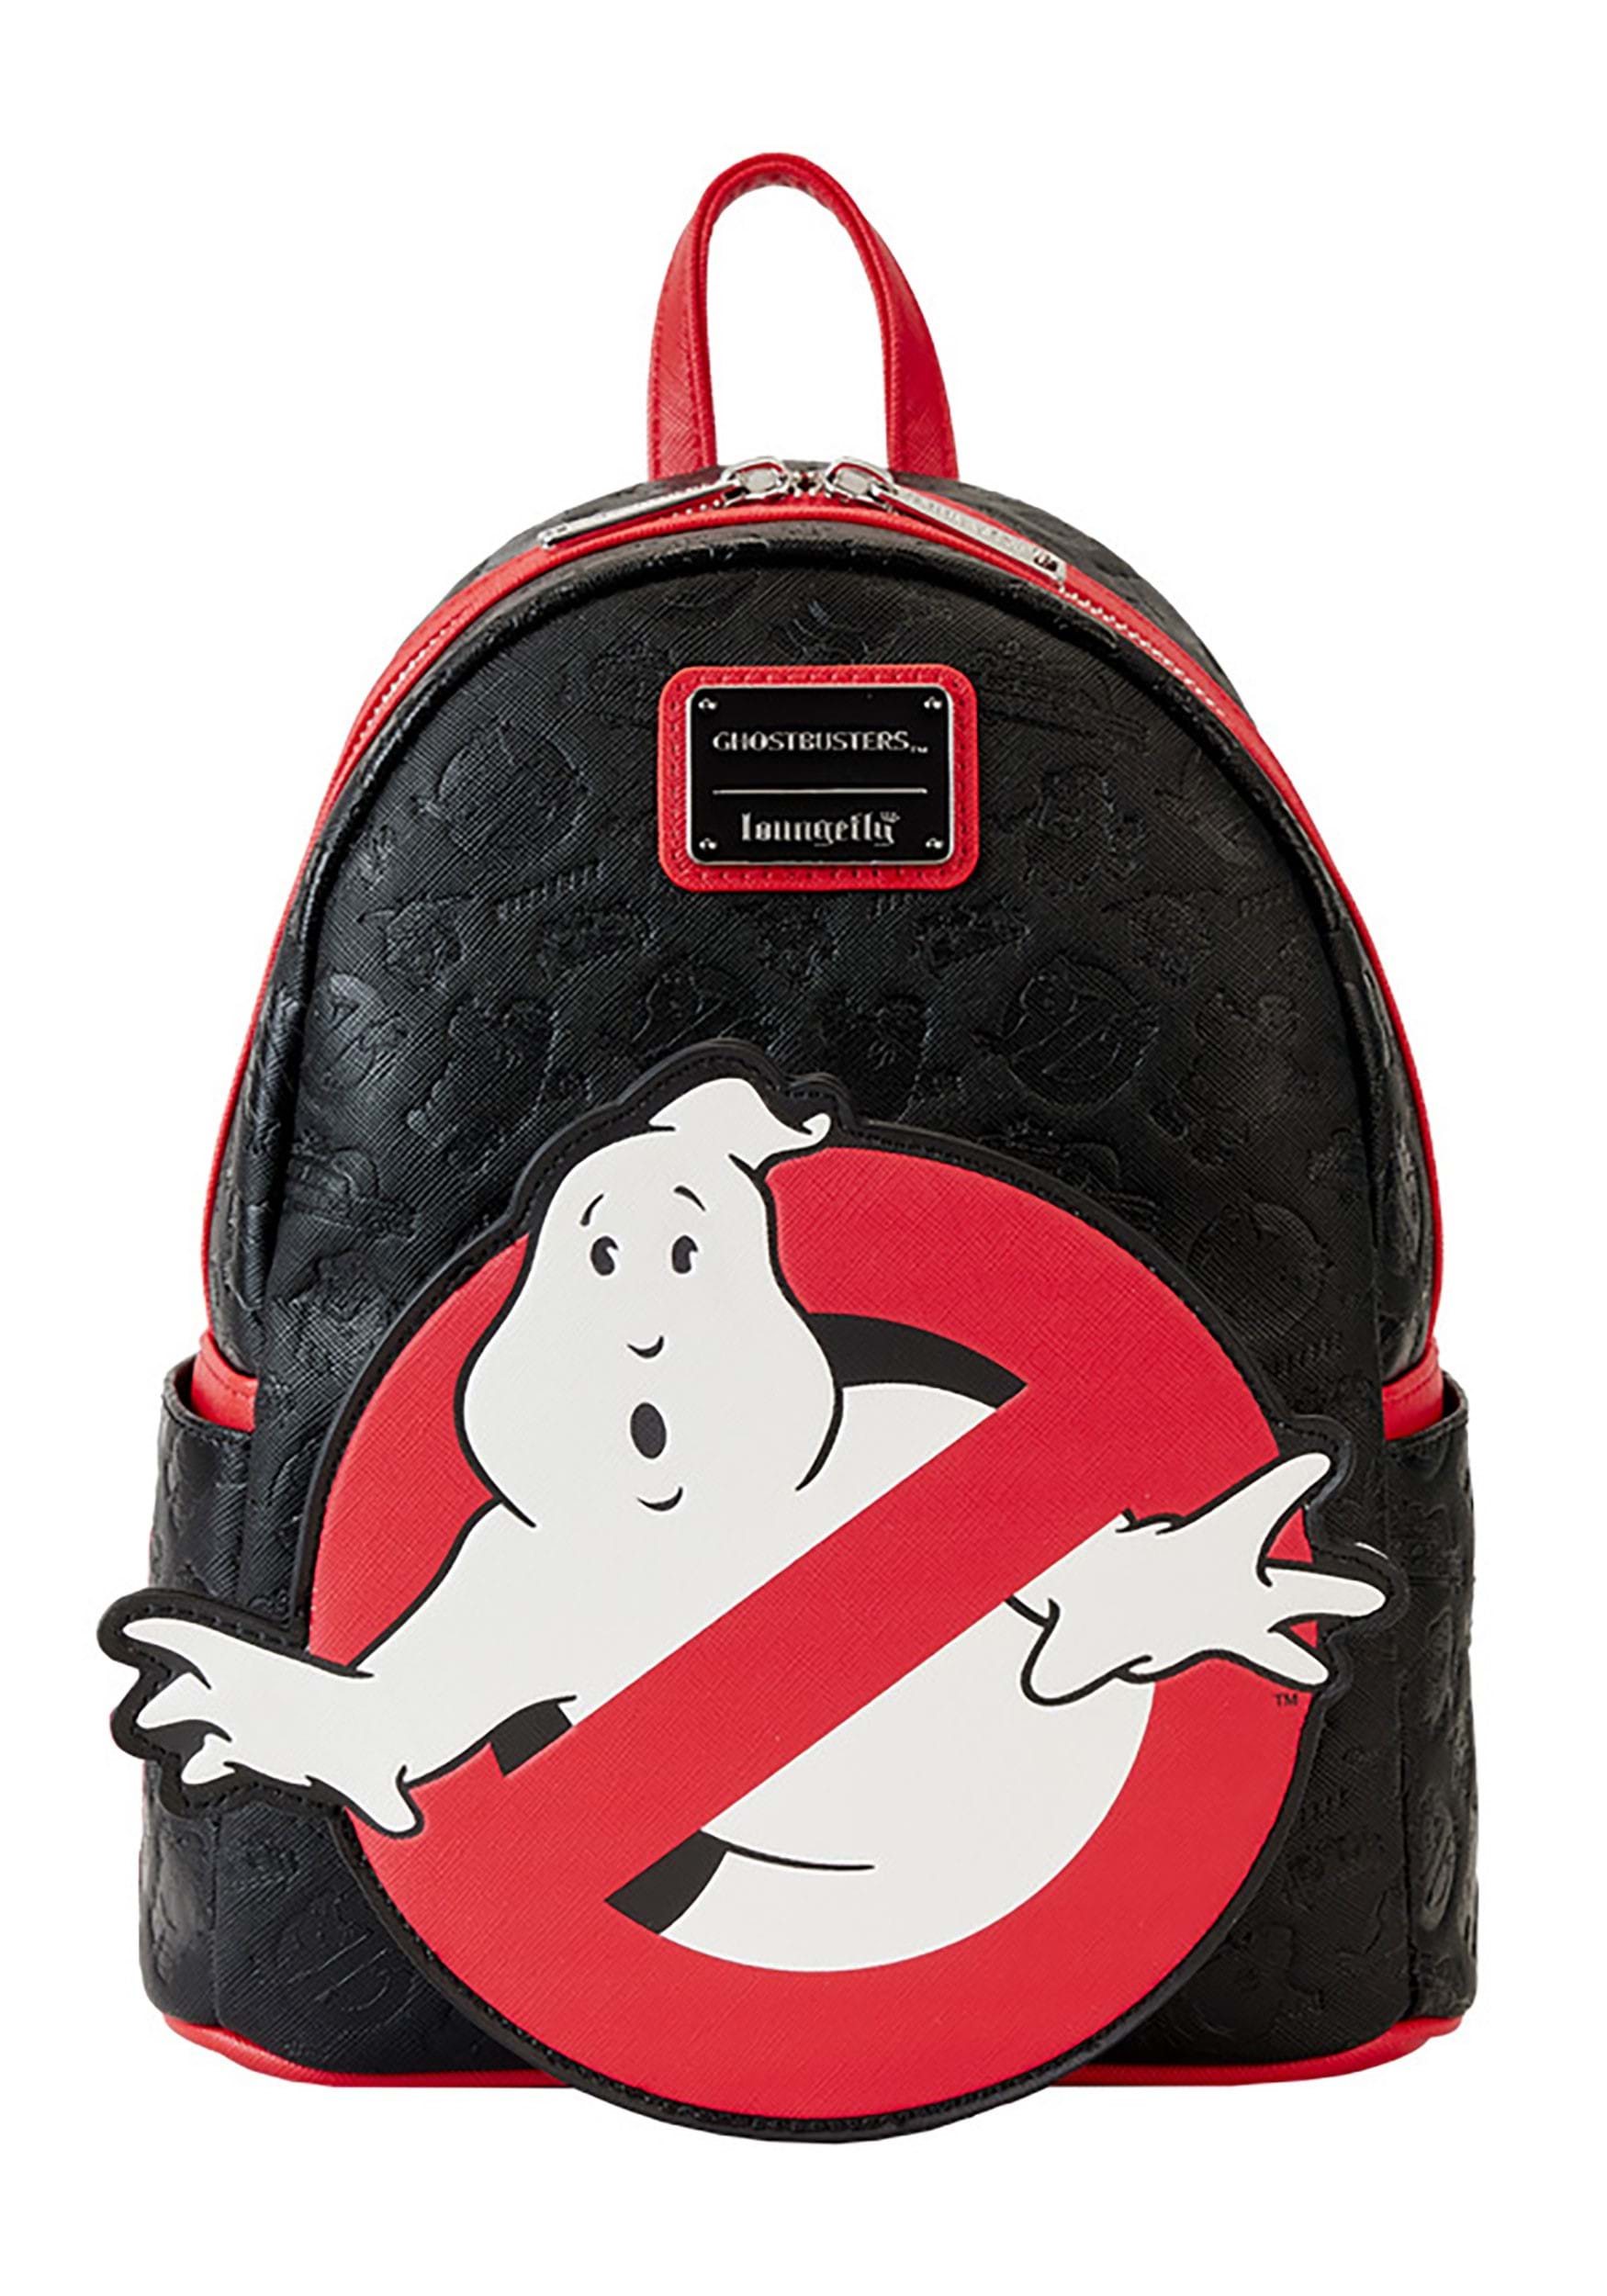 Image of Sony Ghostbusters No Ghost Logo Mini Backpack by Loungefly | Ghostbusters Backpacks ID LFGBBK0017-ST